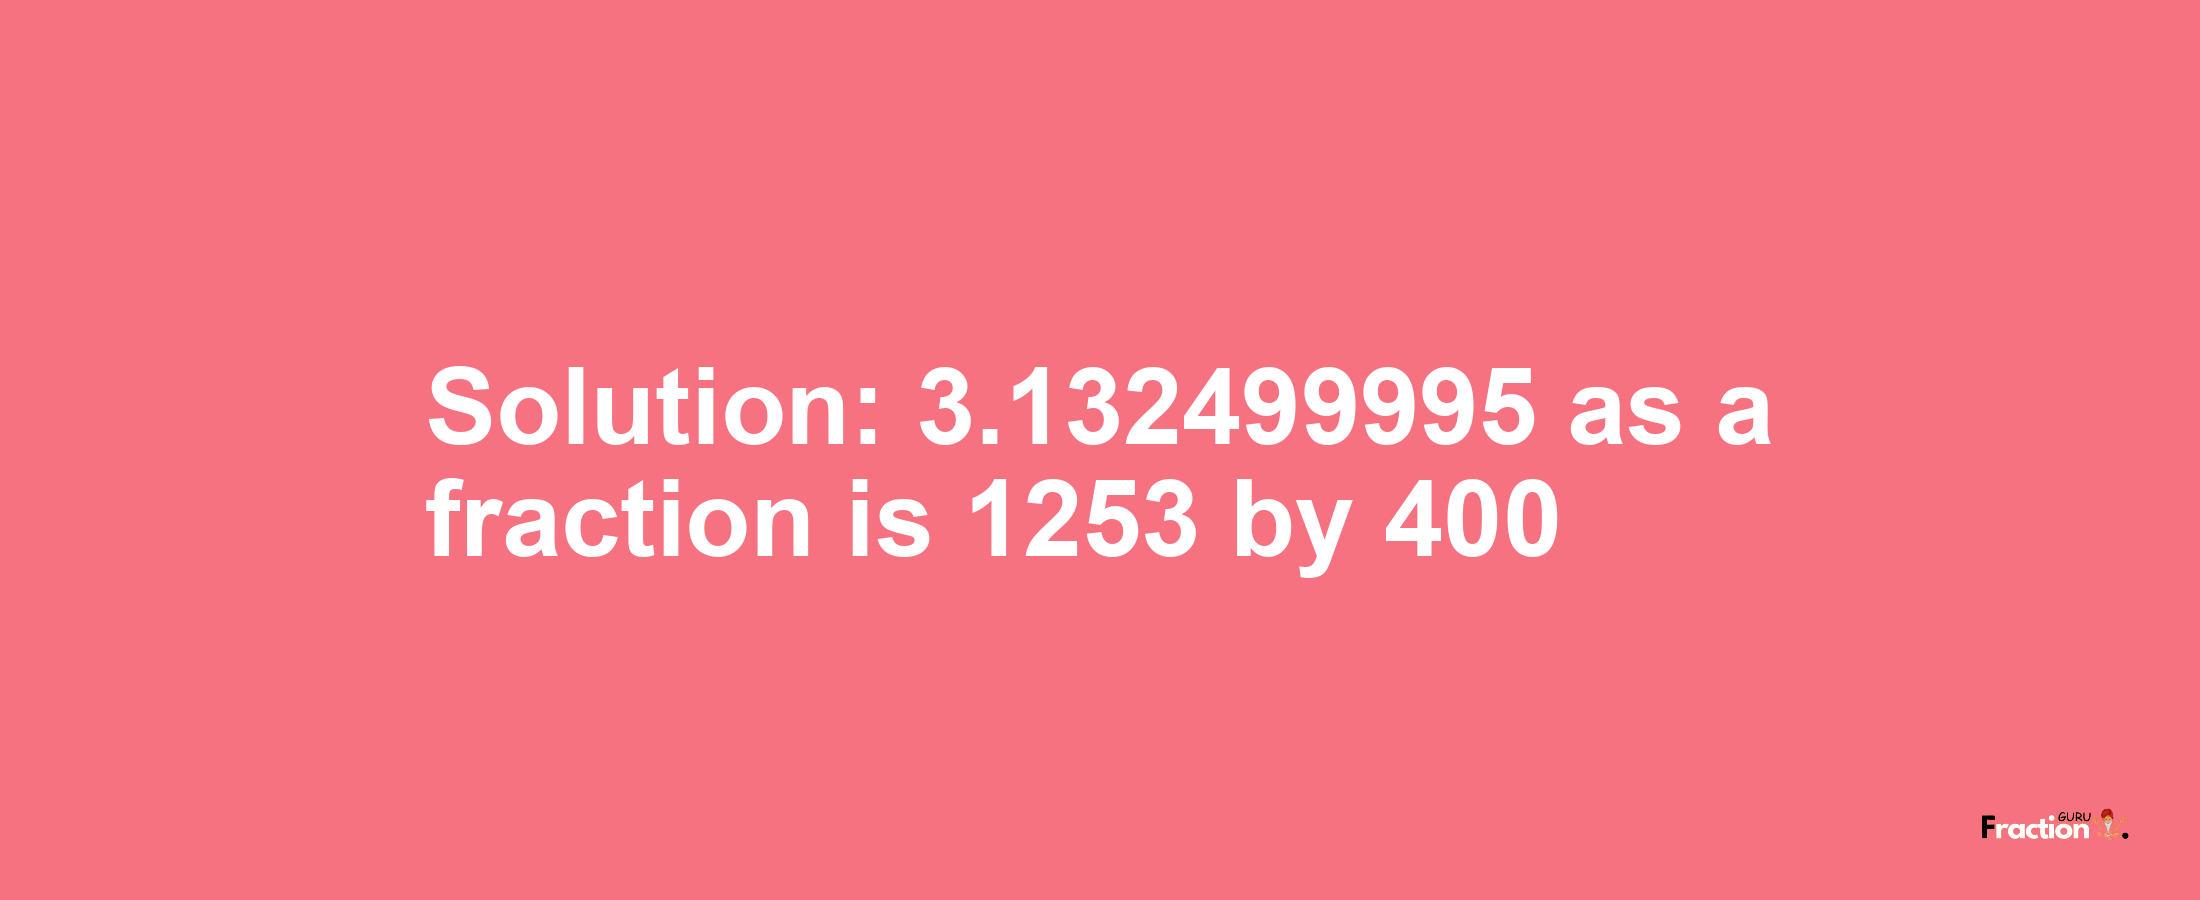 Solution:3.132499995 as a fraction is 1253/400